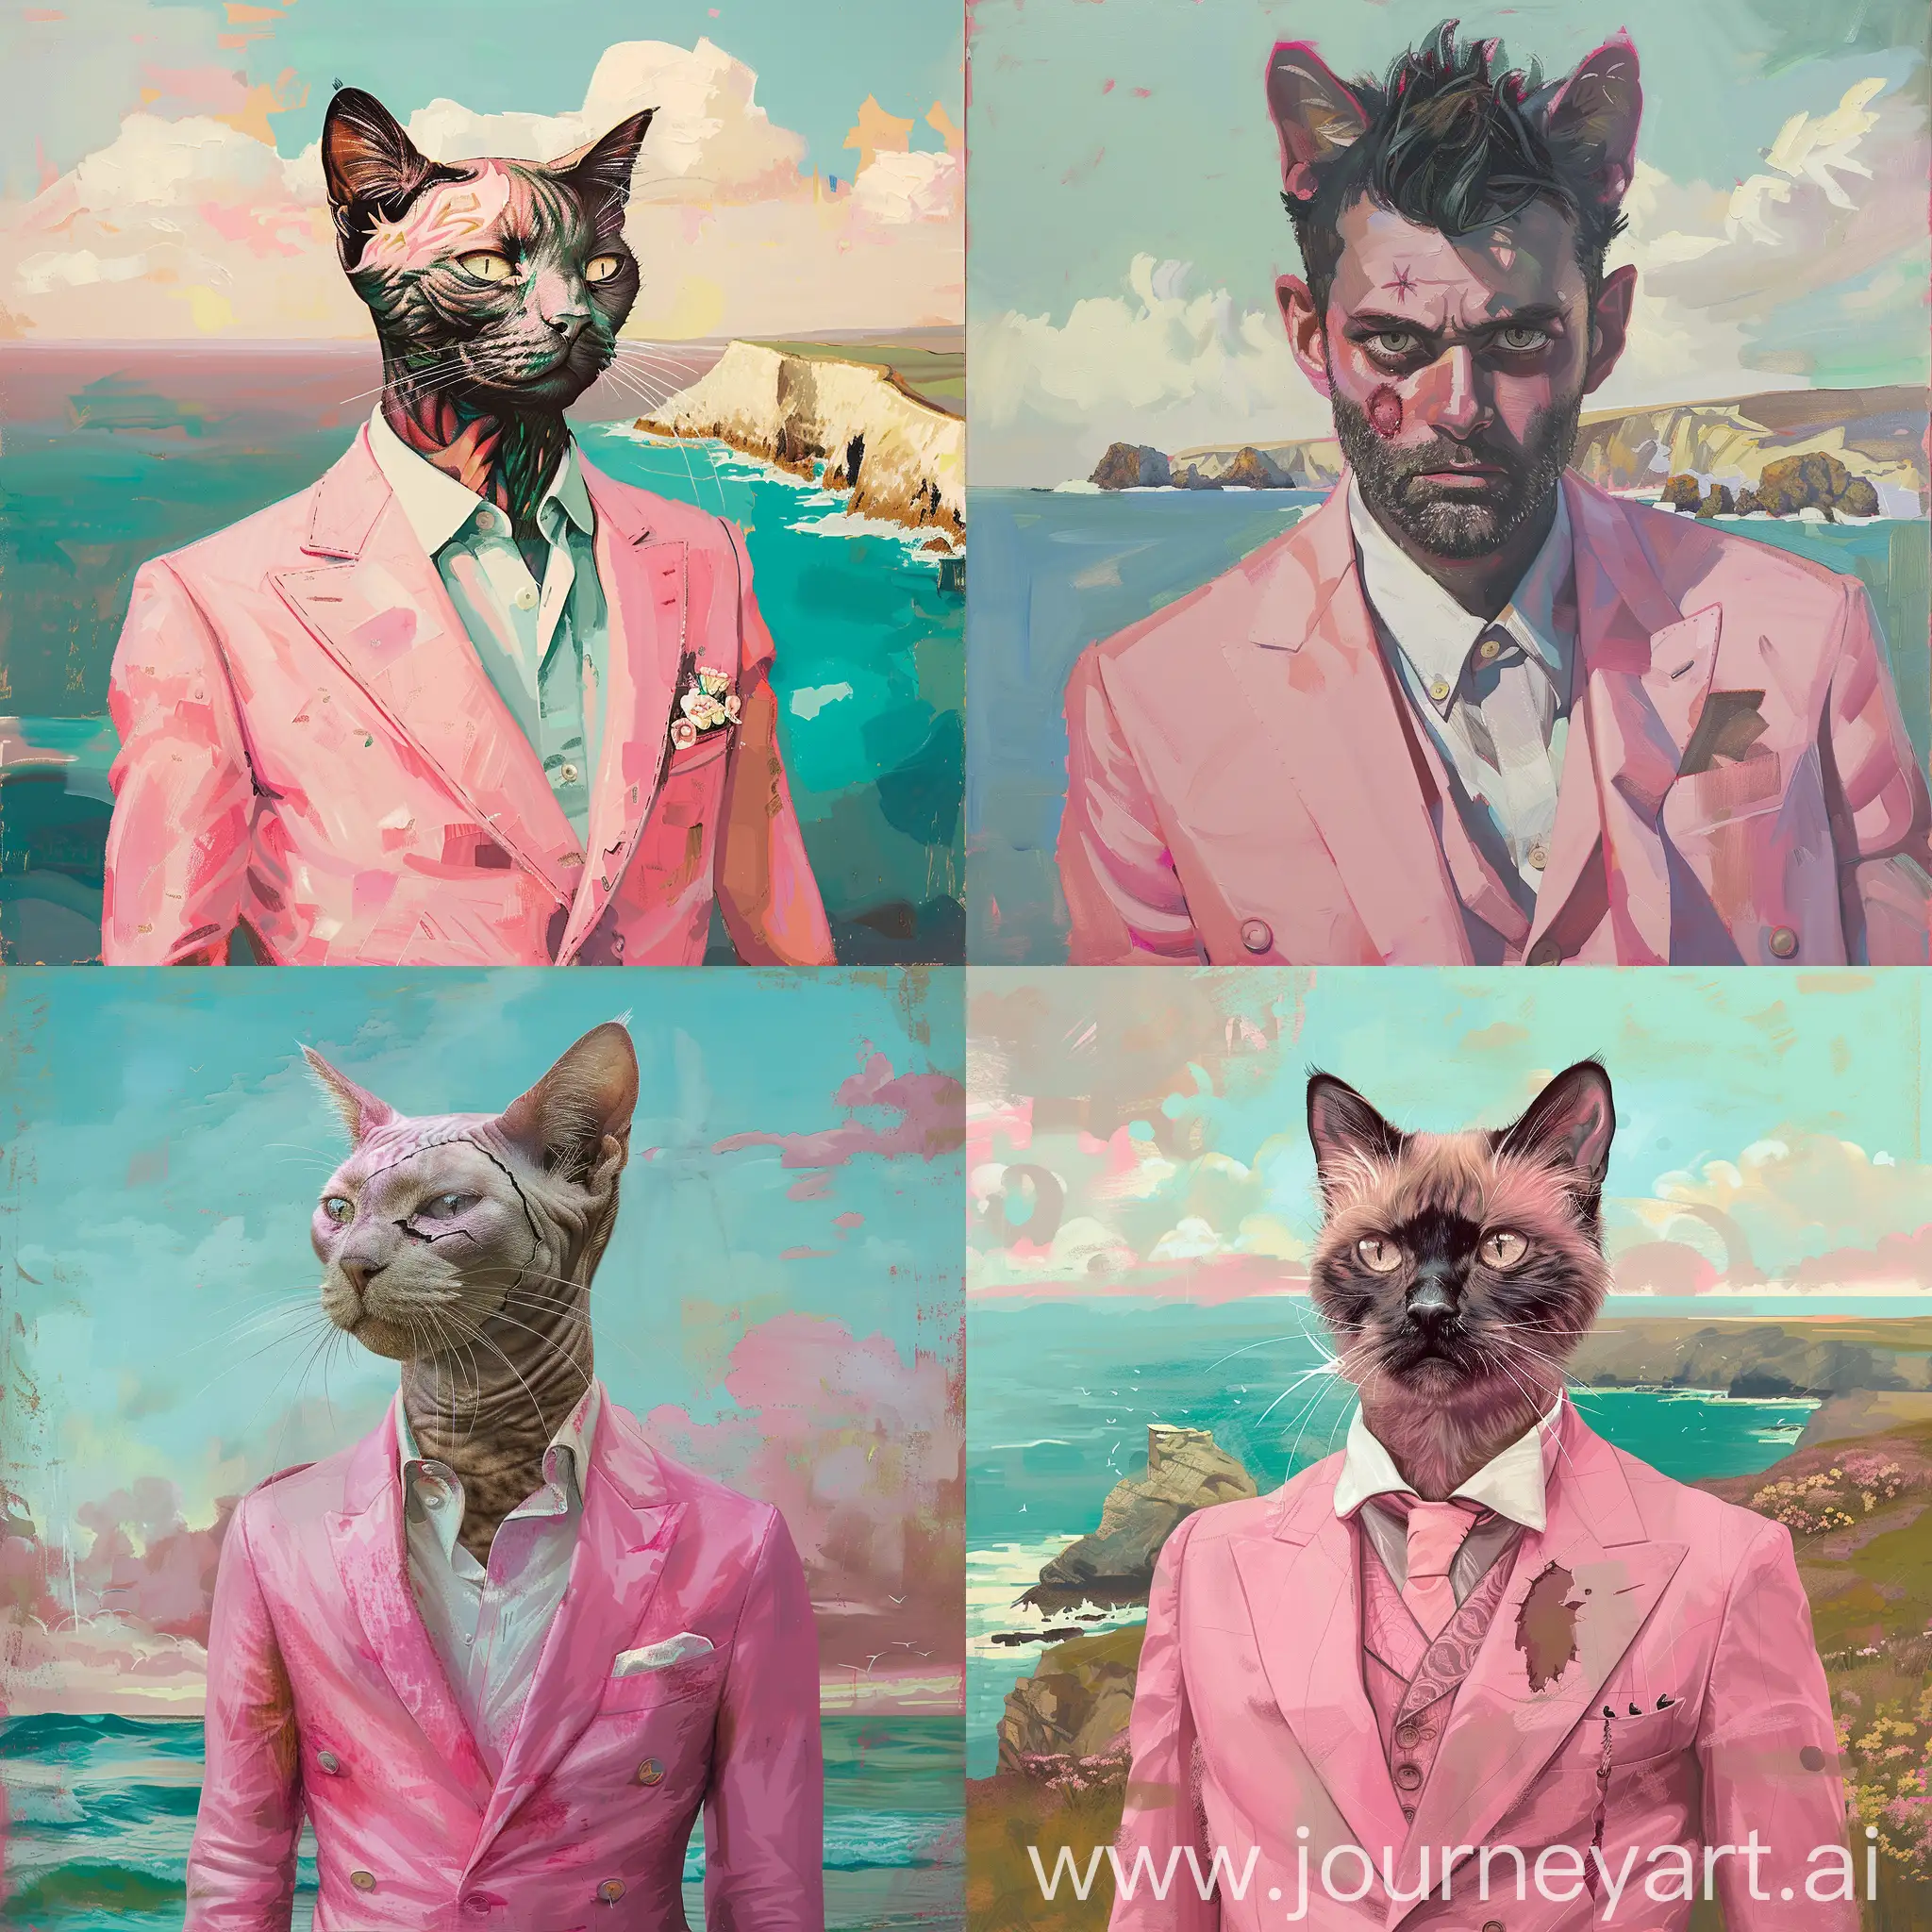 Serious-Cat-Man-in-Whimsical-Pink-Suit-by-British-Coast